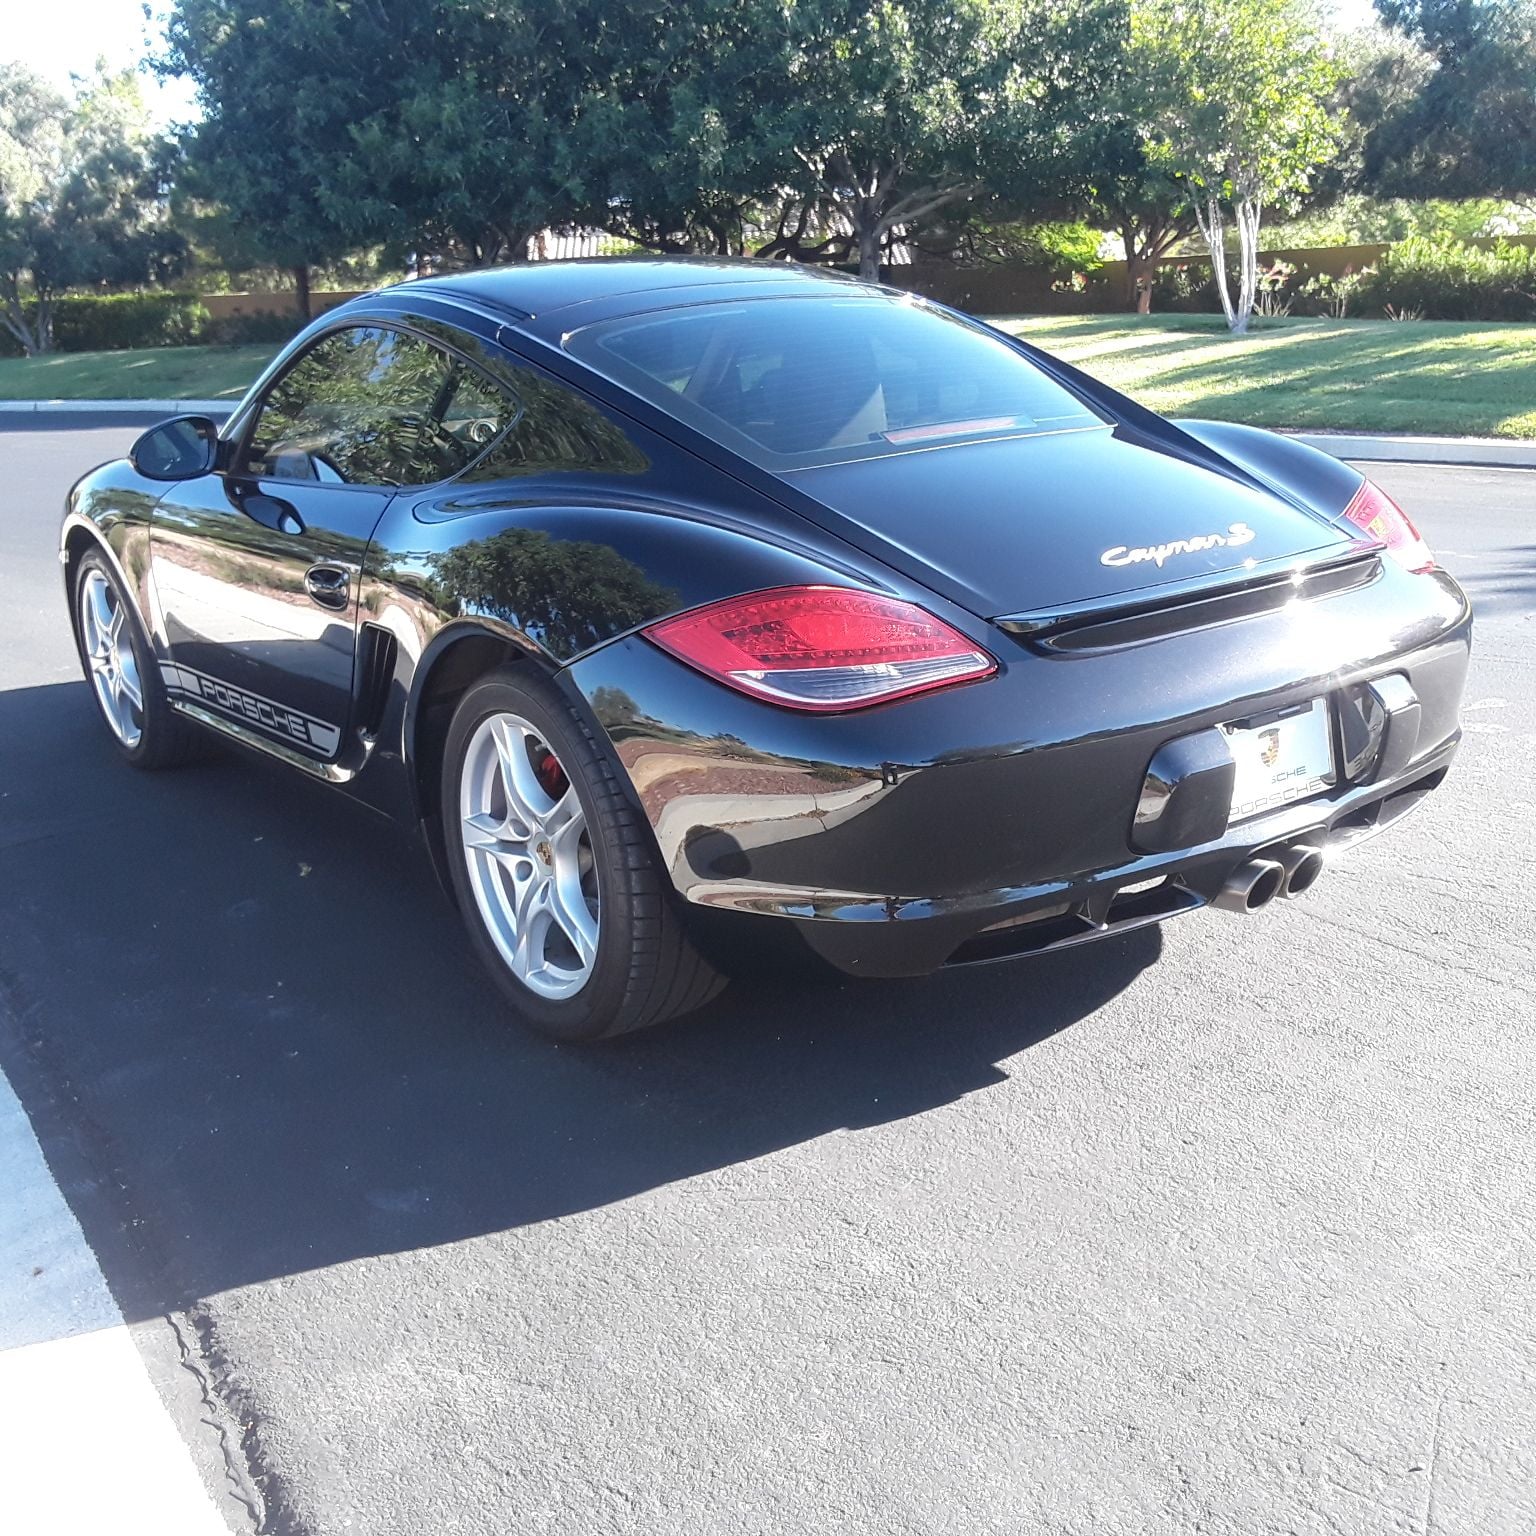 2009 Porsche Cayman - 2009 Porsche Cayman S with 6 spd Manual Trans - Used - VIN Chrono Sport - 37,452 Miles - 6 cyl - 2WD - Manual - Coupe - Black - Las Vegas, NV 89131, United States